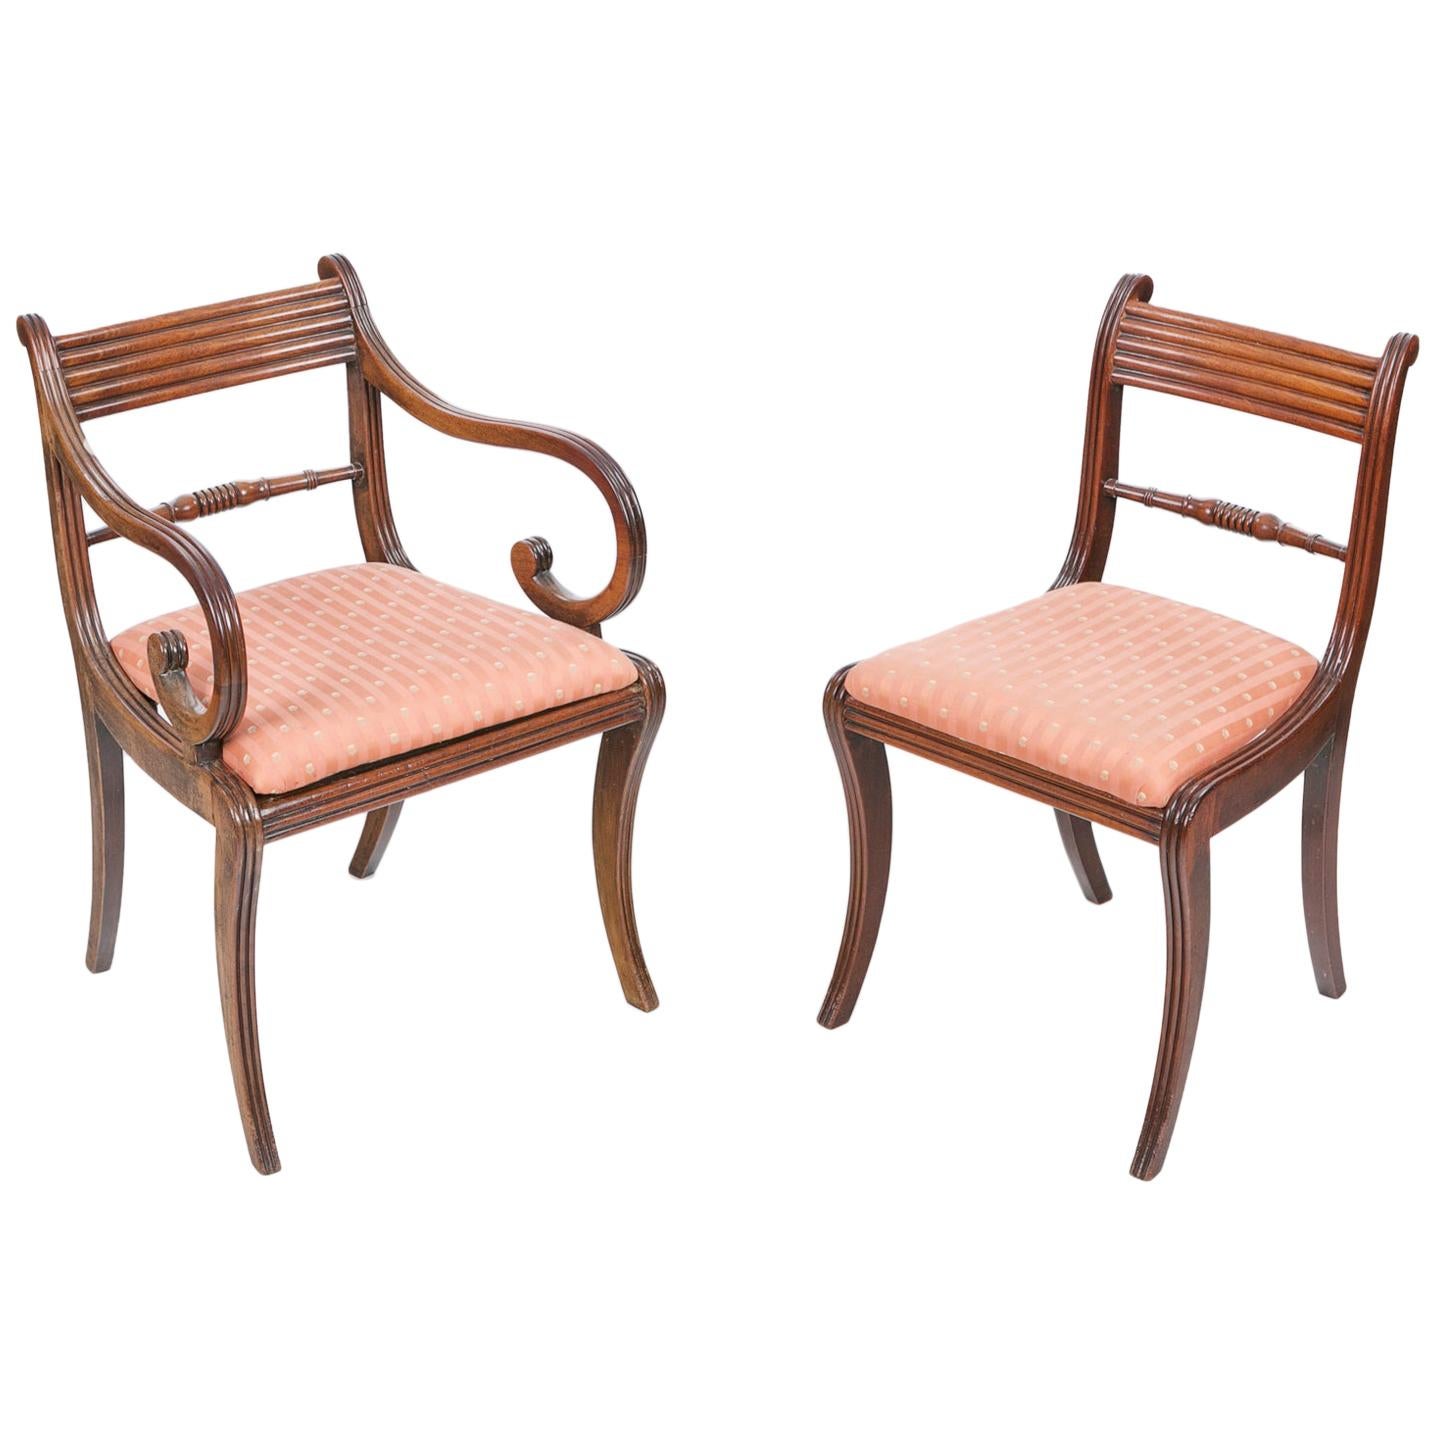 Early 19th Century Regency Set of Ten Dining Chairs